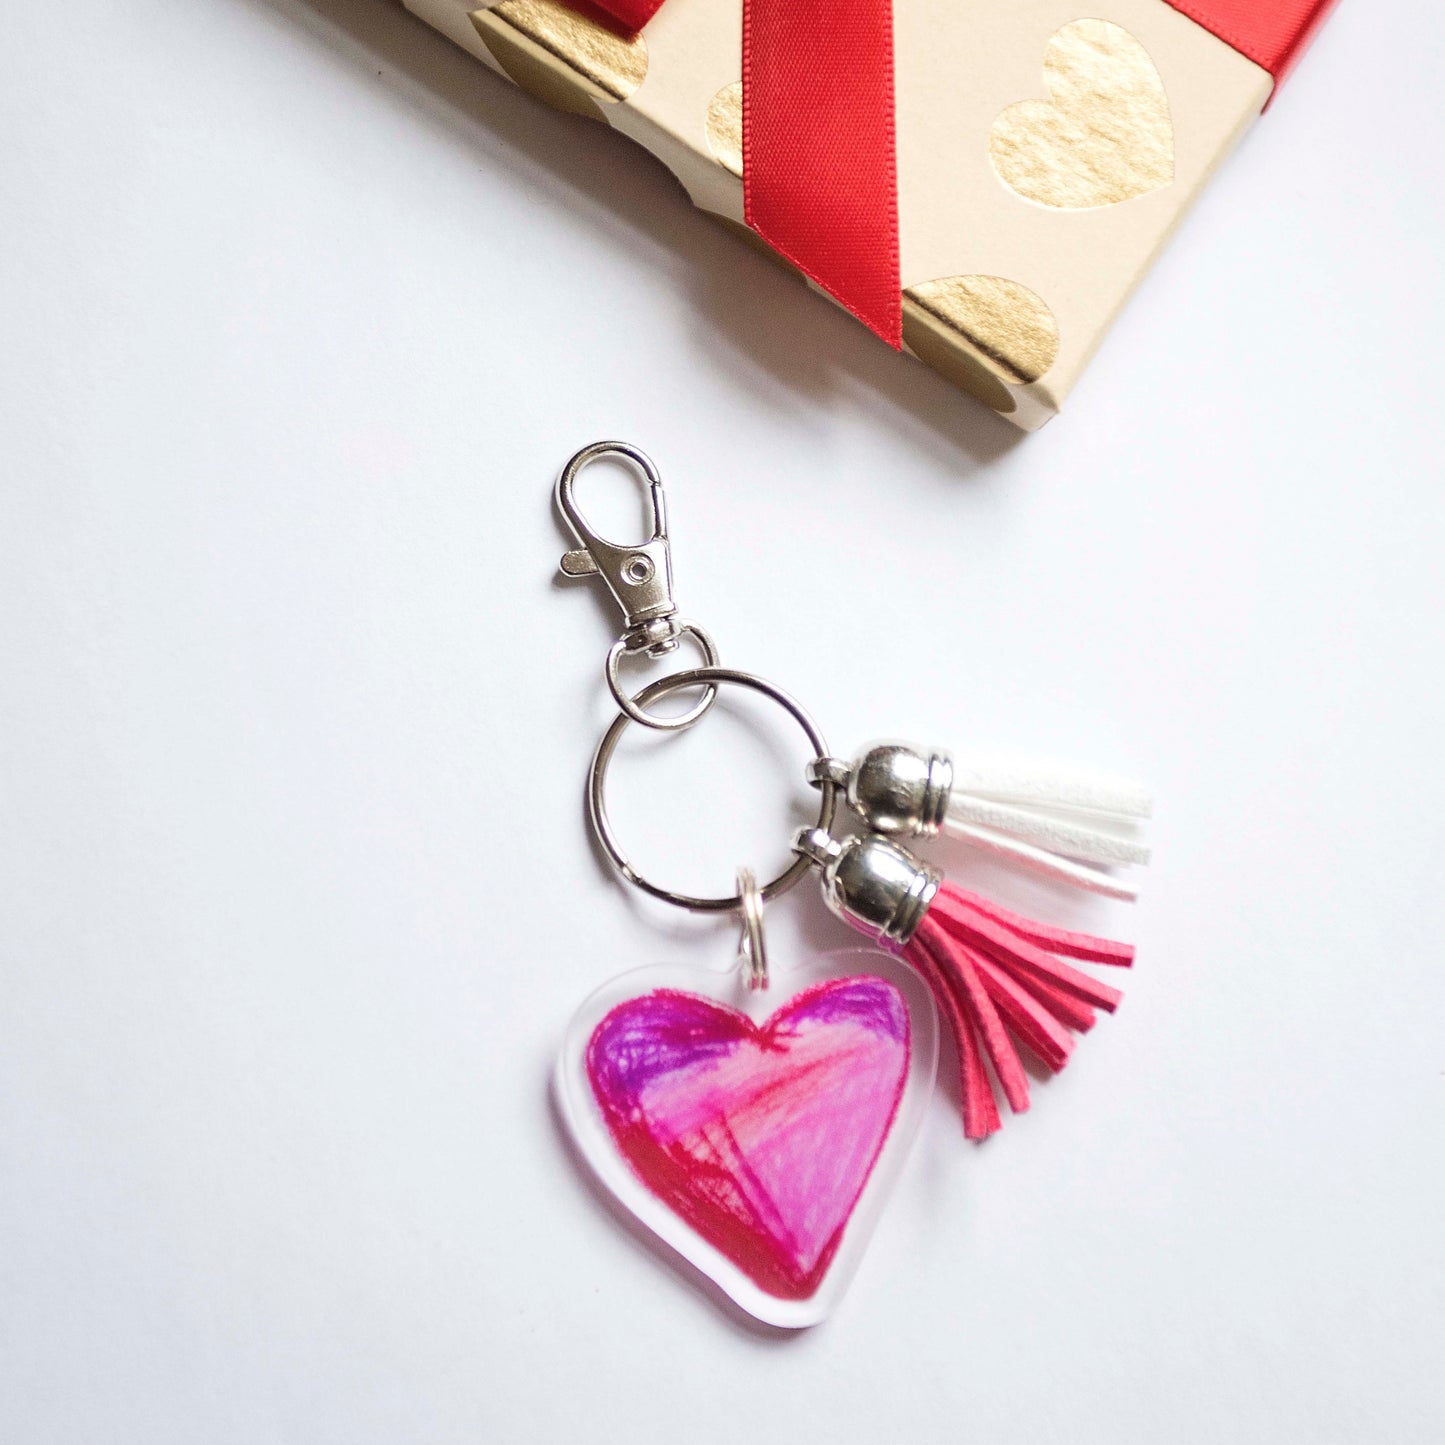 My Heart keychain with a lobster clasp and two tassels faux sued in Pink and White